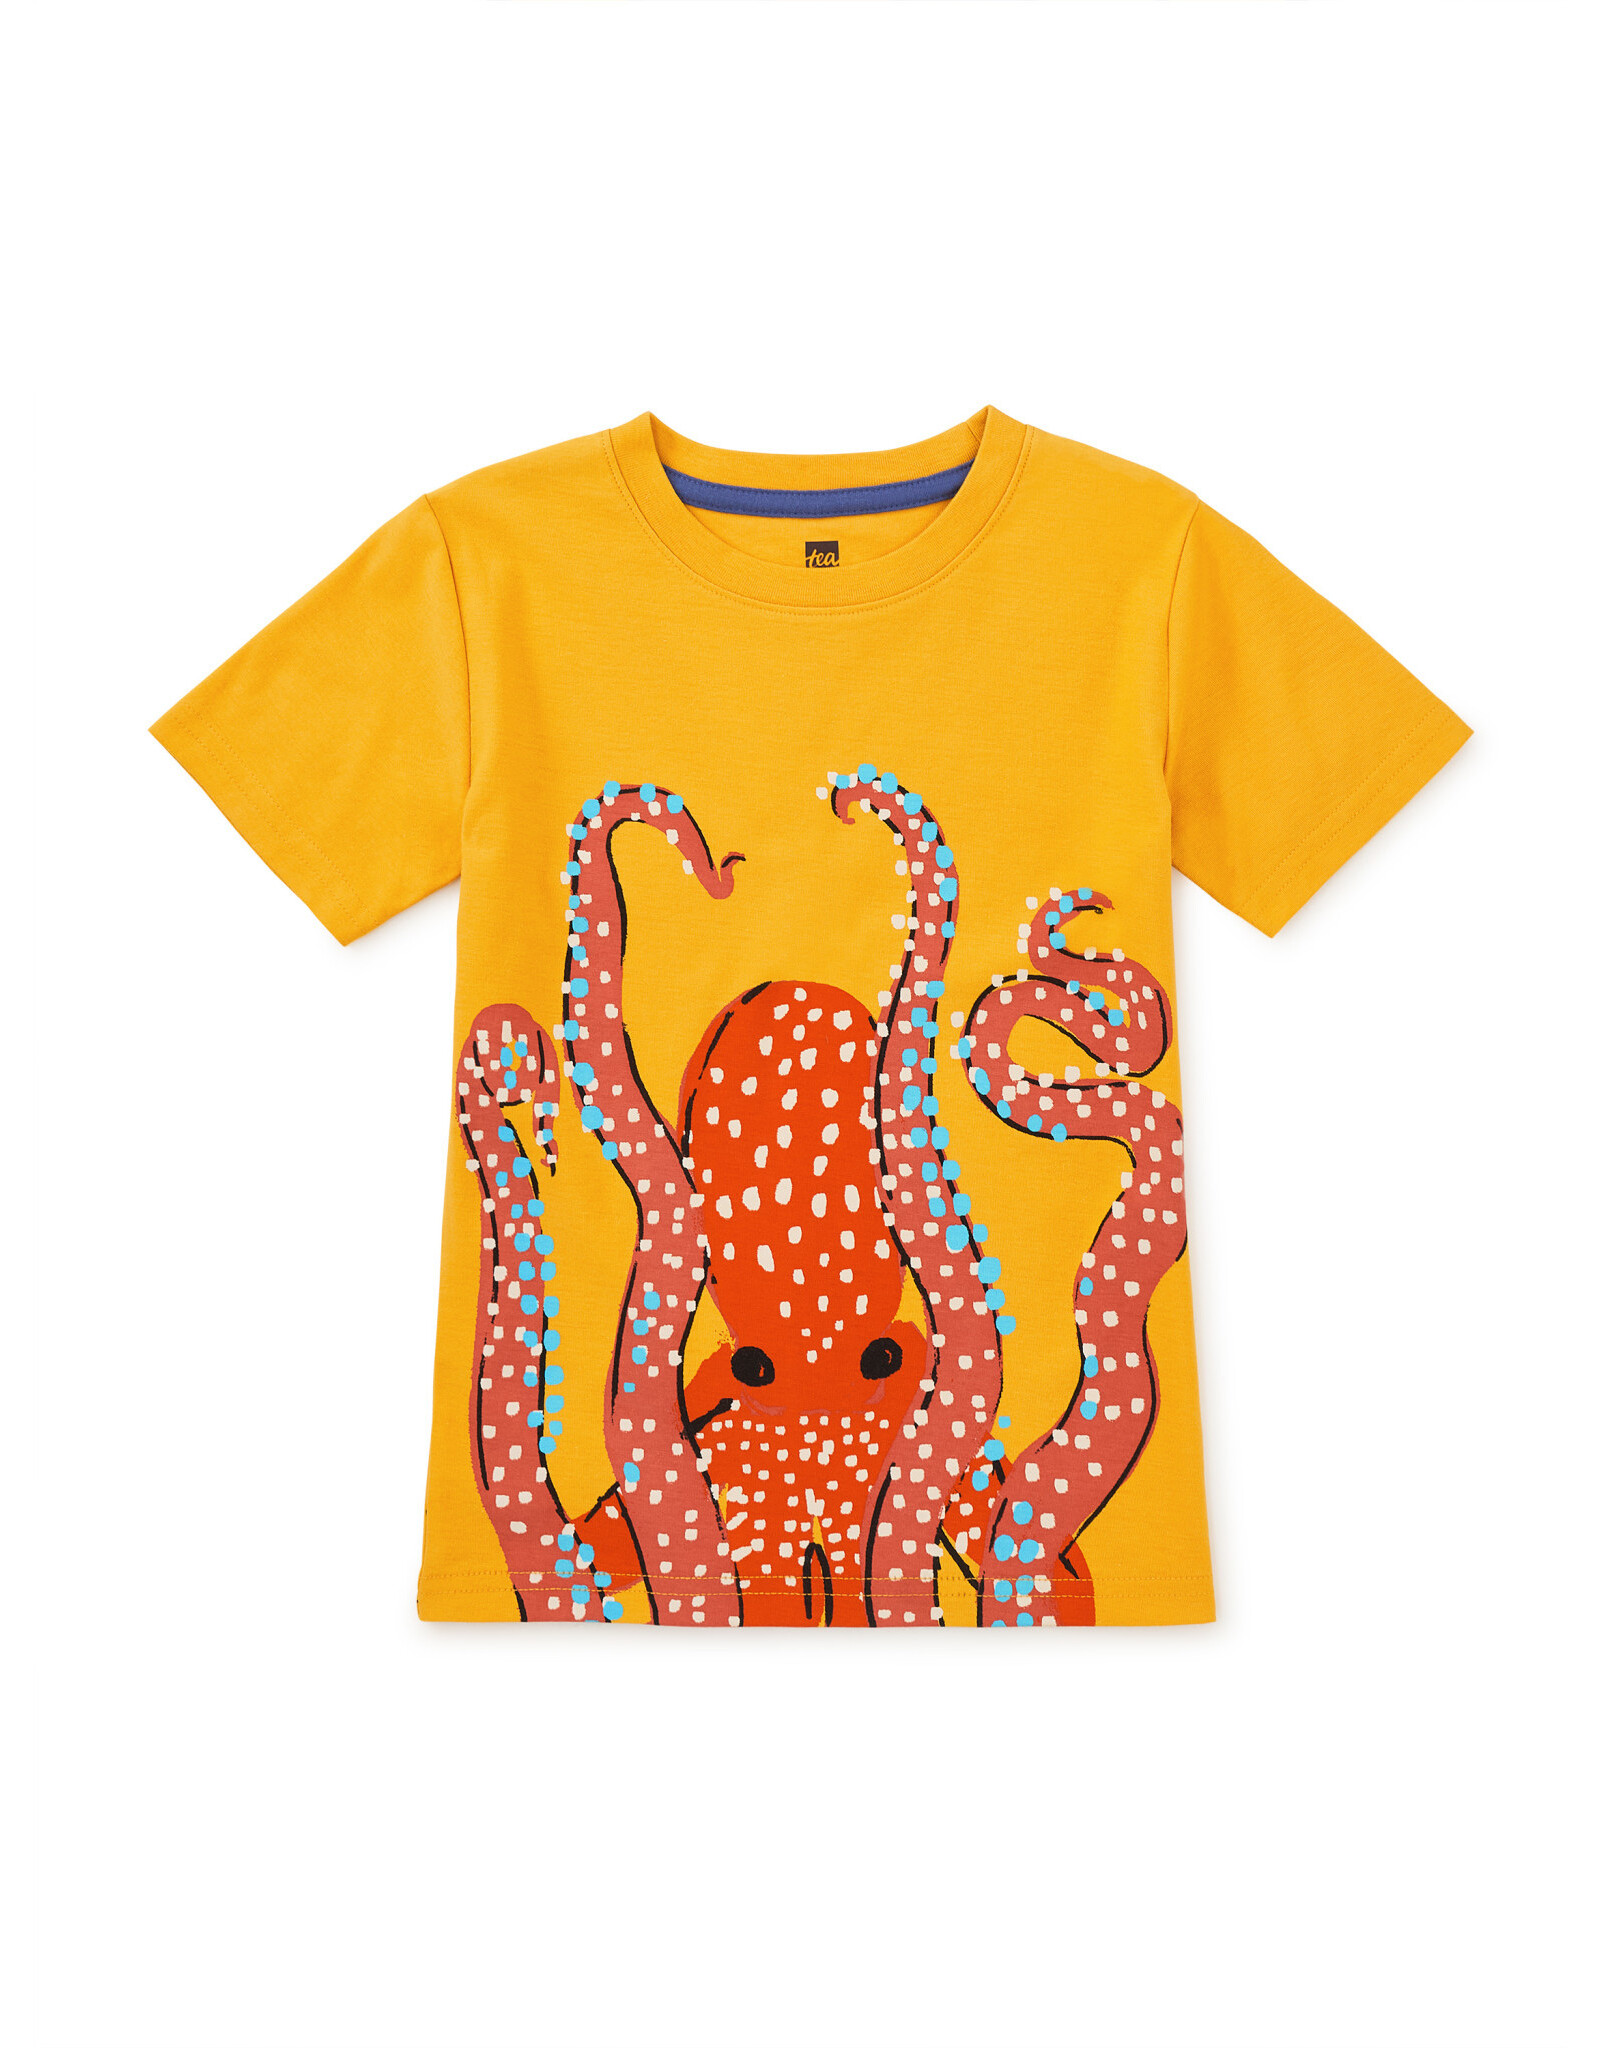 Tea Collection Octopus Ink Graphic Tee-Gold